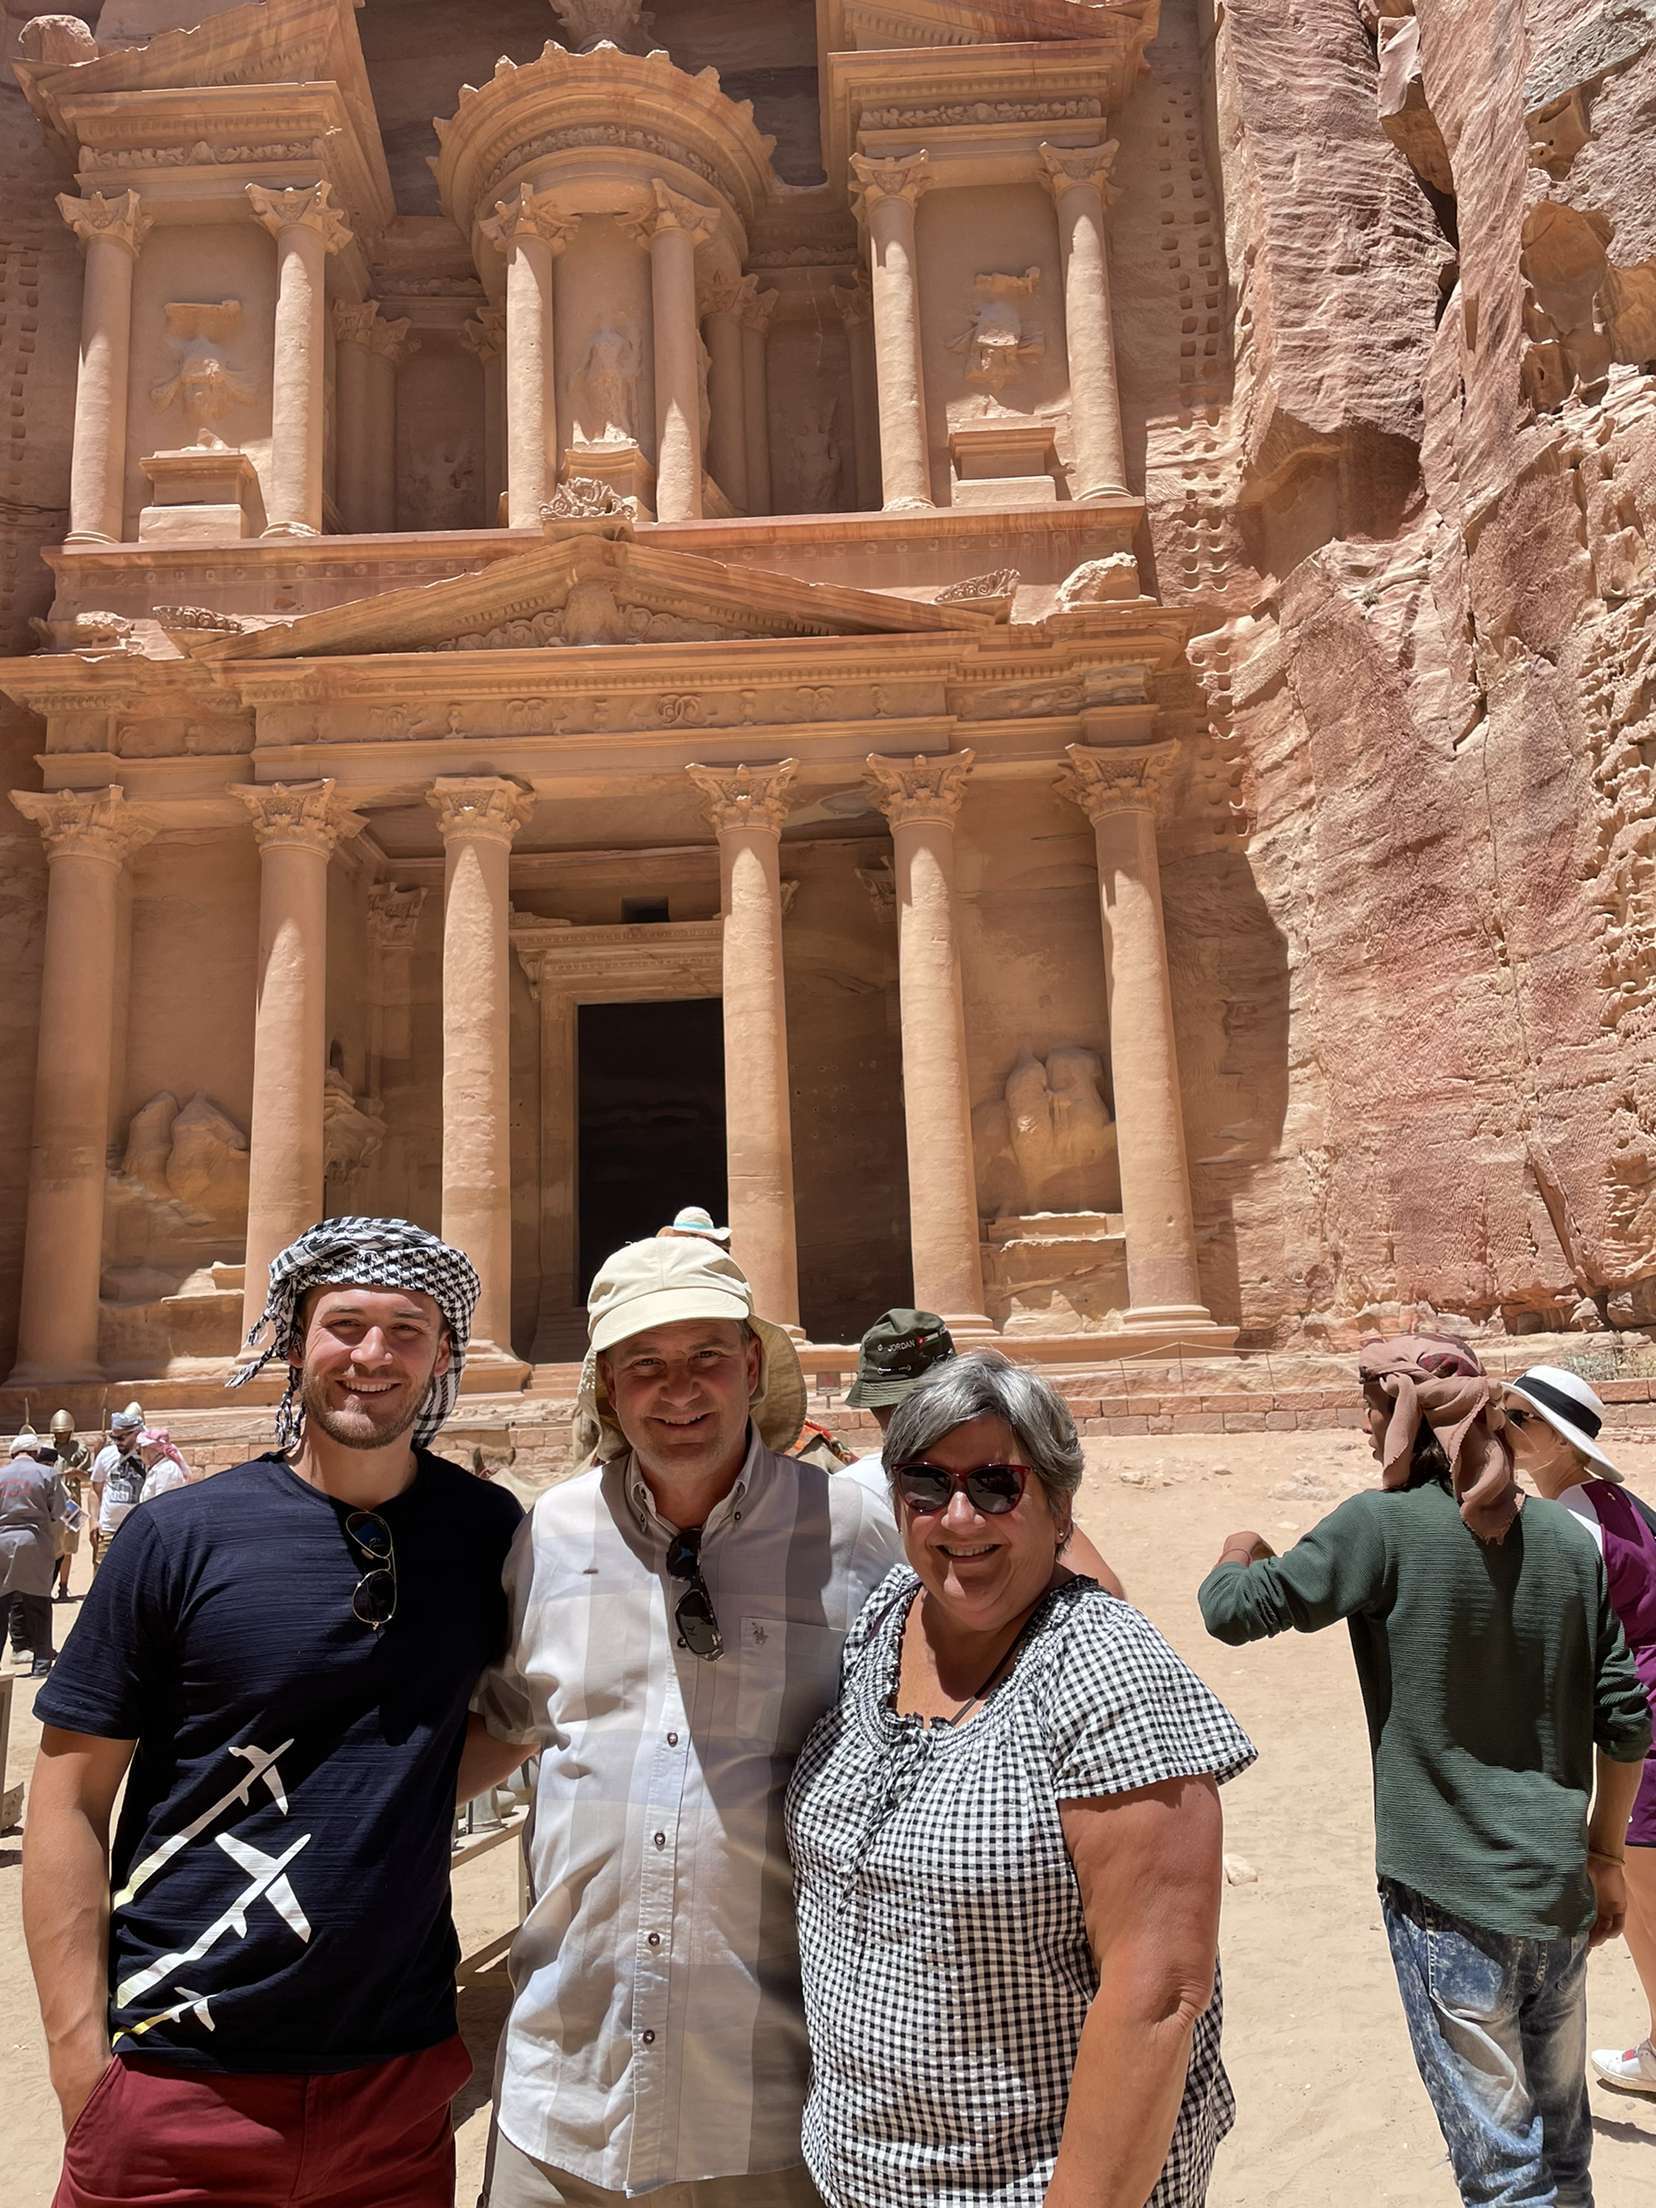 James and his parents posing together in Petra